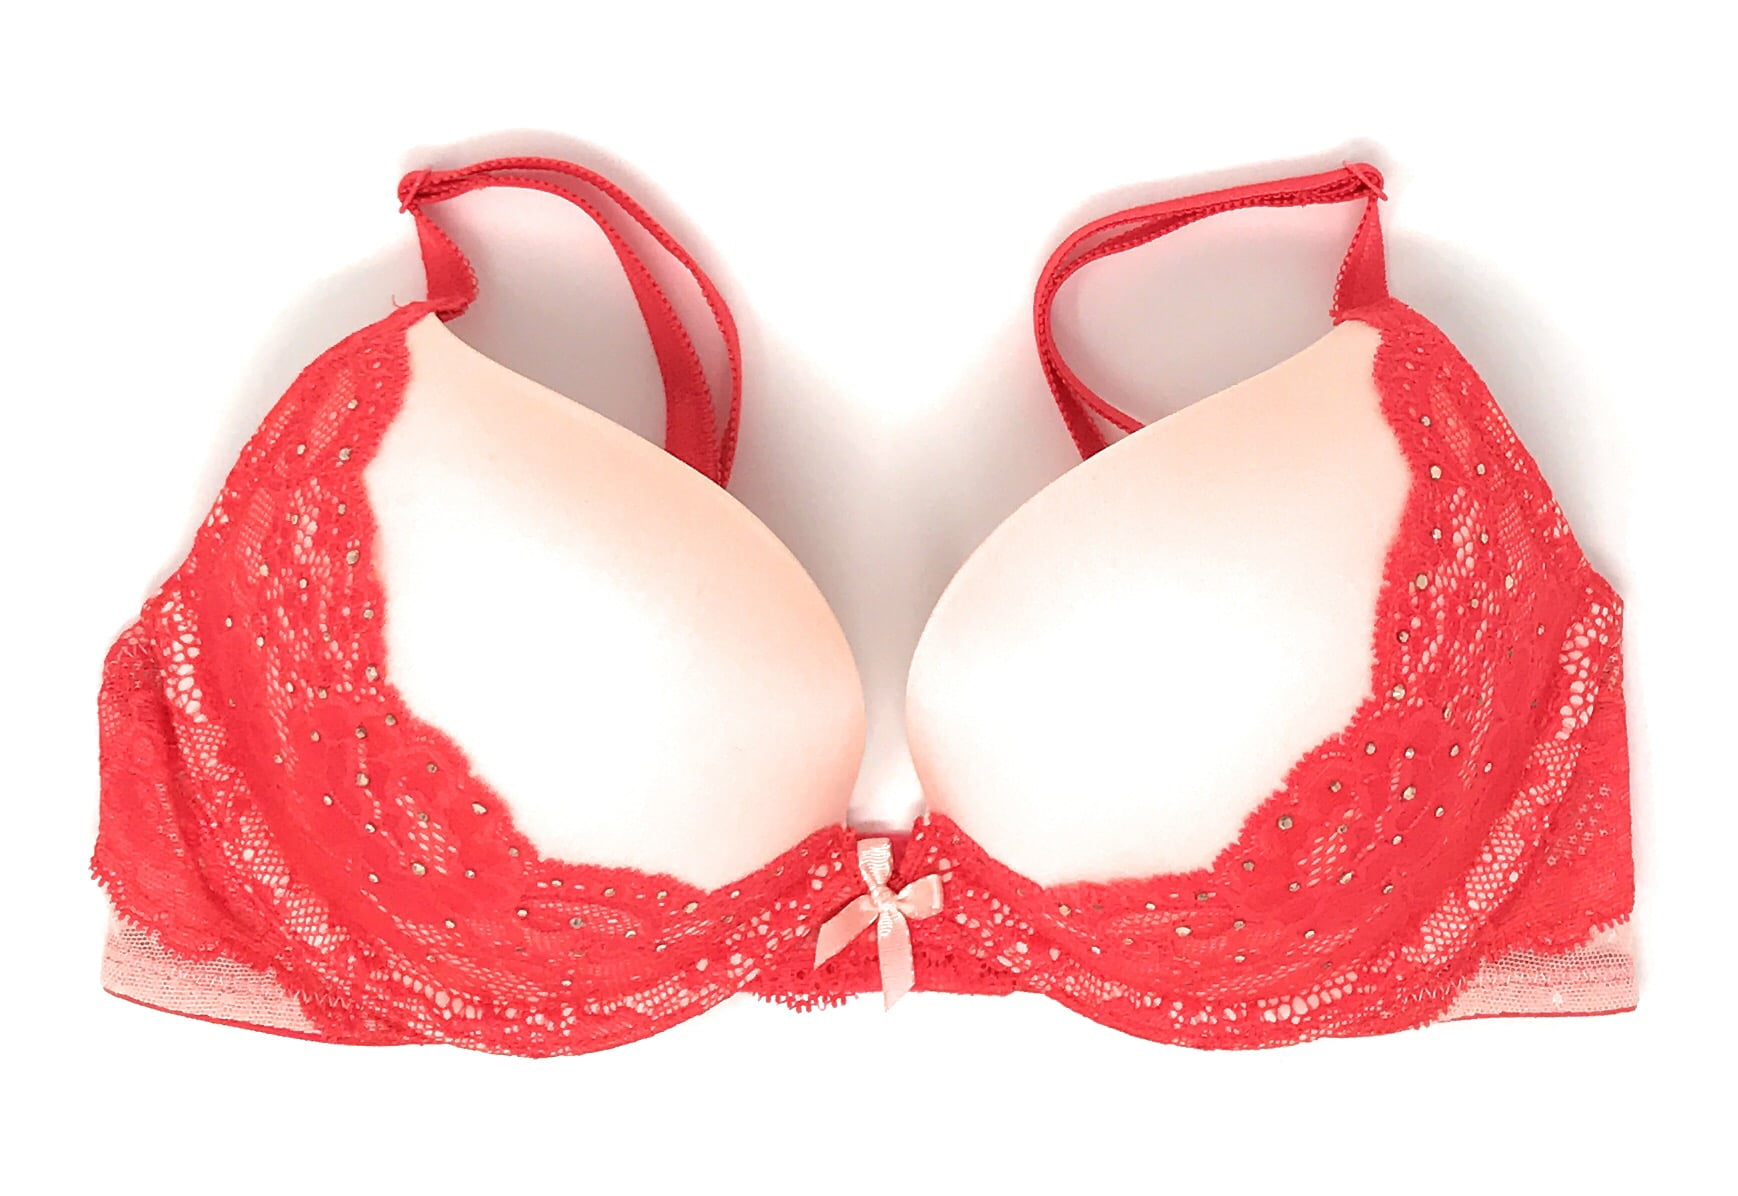 Victoria's Secret Bombshell Add-2-Cups Push-Up BH (75A-85D), Rot - Lipstick  Red, 85C 